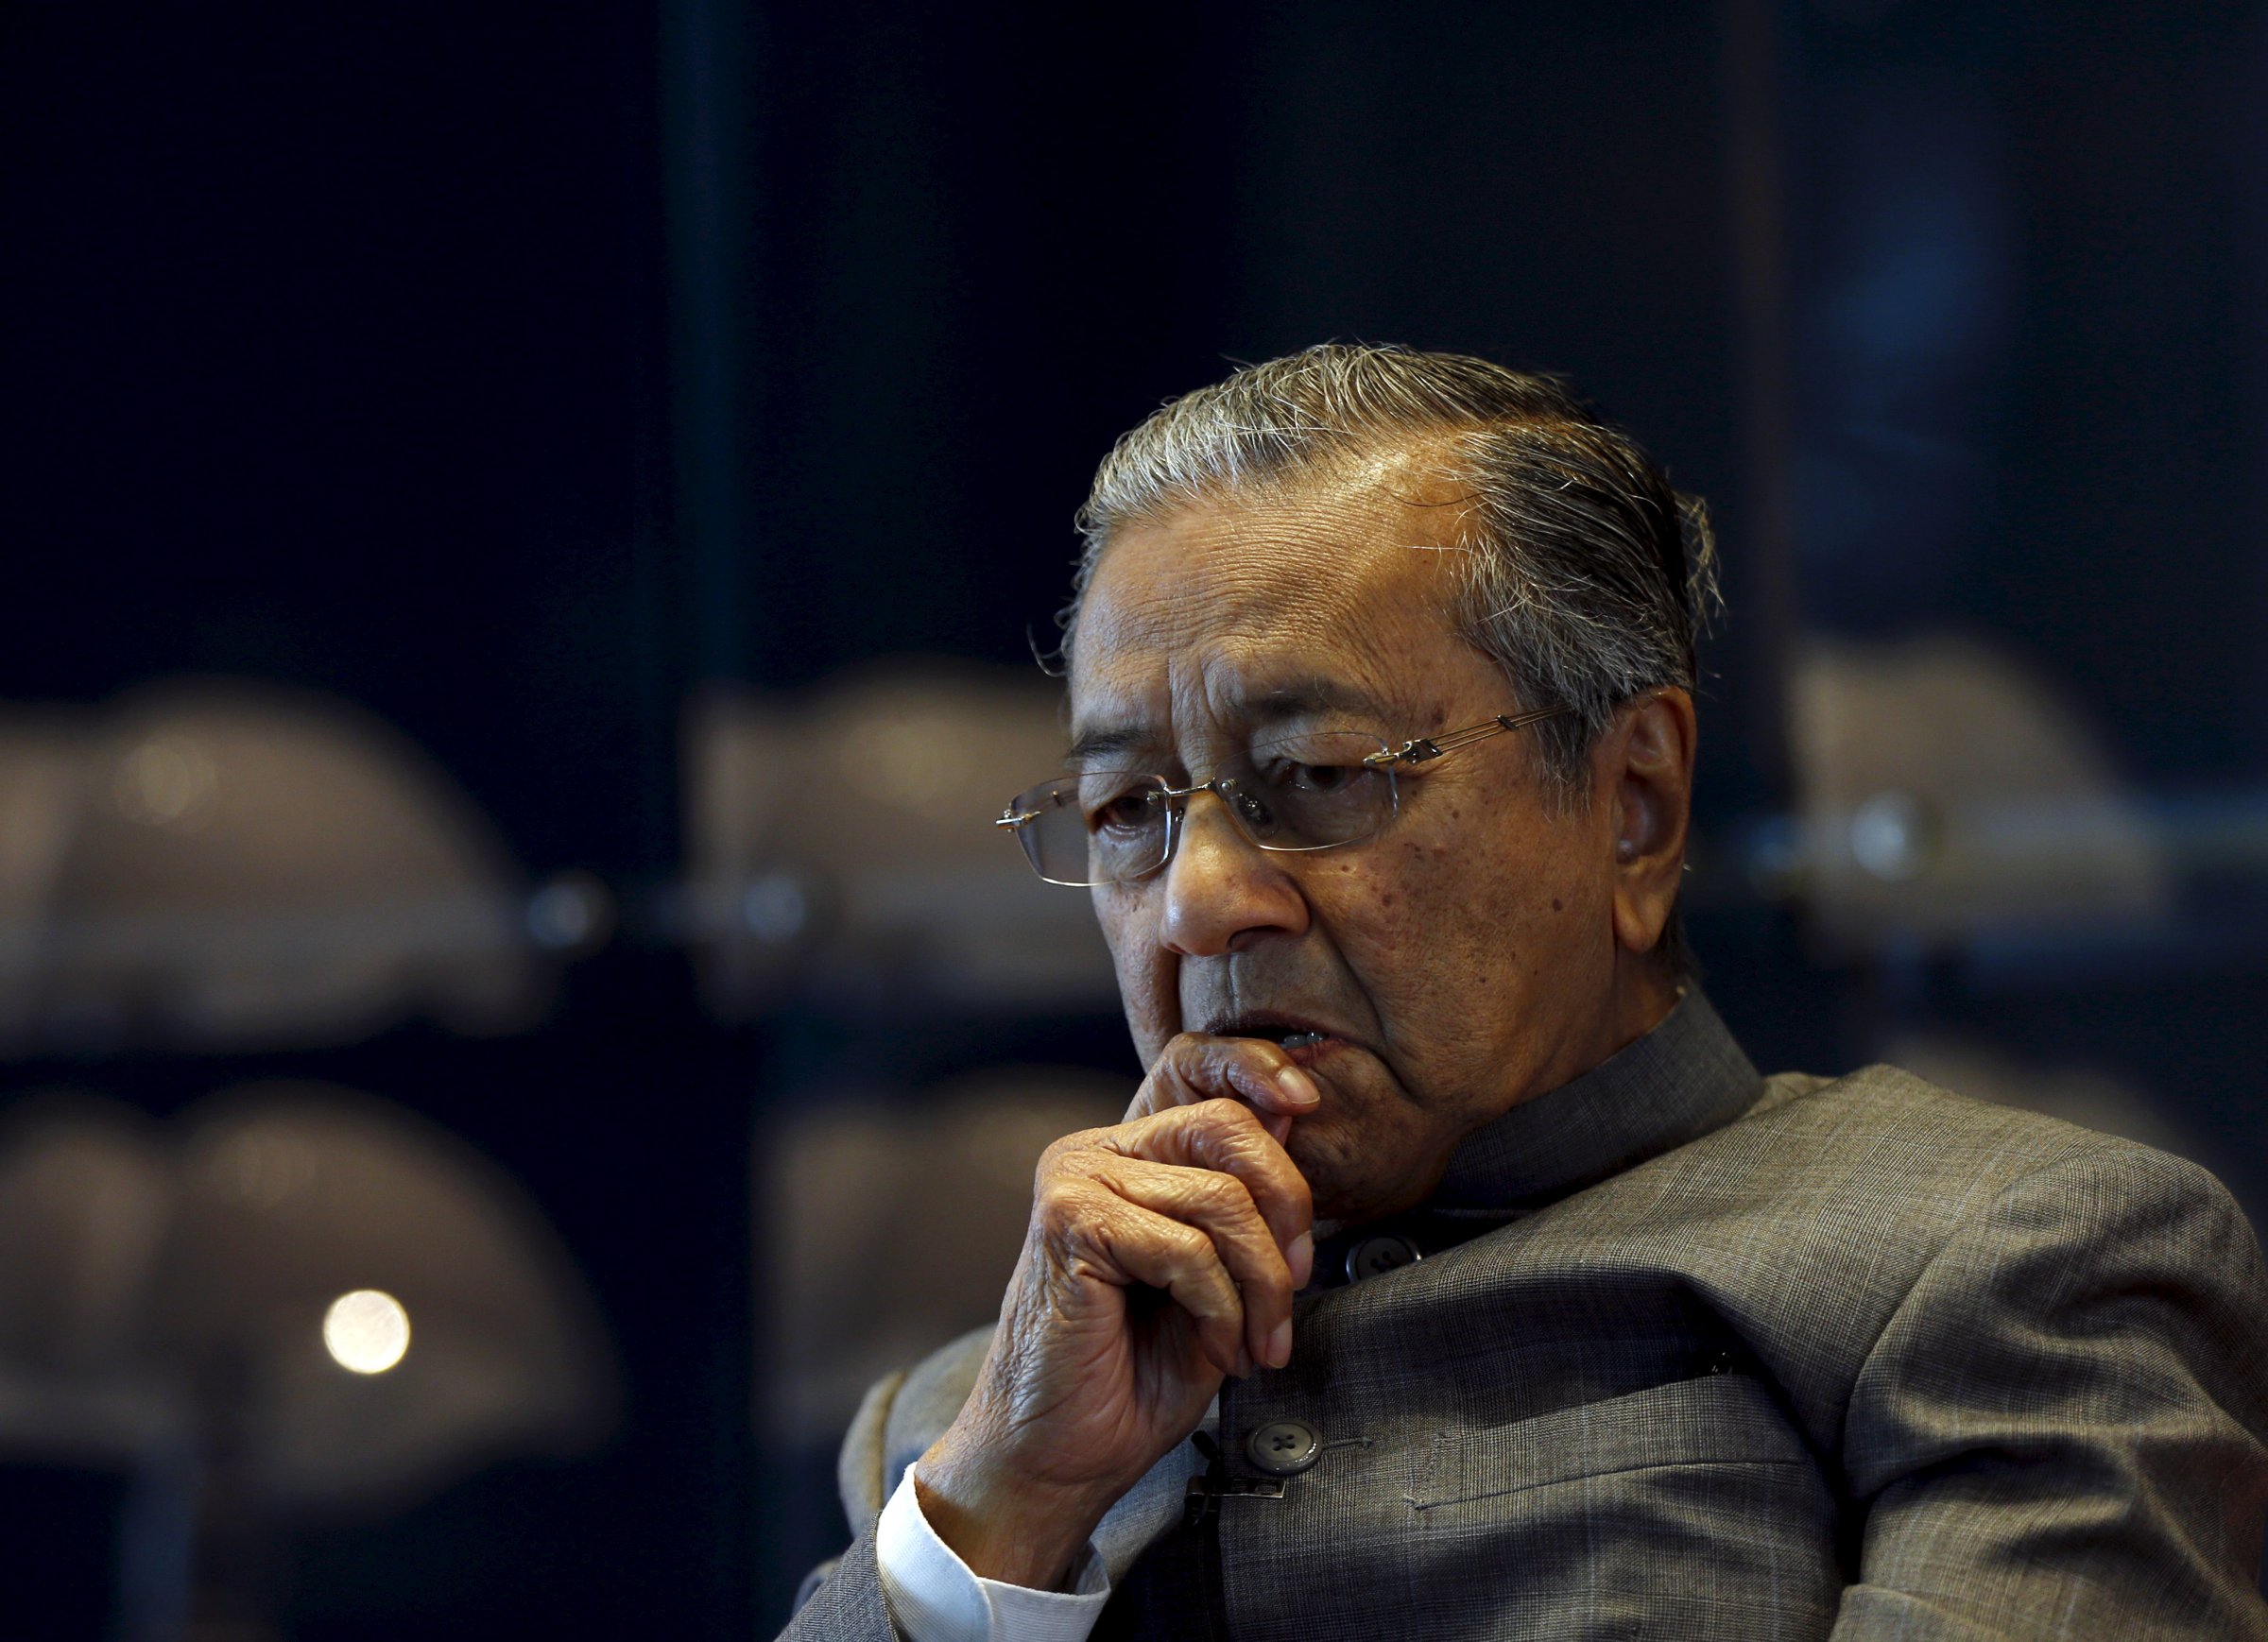 Malaysia's former prime minister Mahathir Mohamad during an interview with Reuters at his office in Petronas Towers, Kuala Lumpur, Malaysia